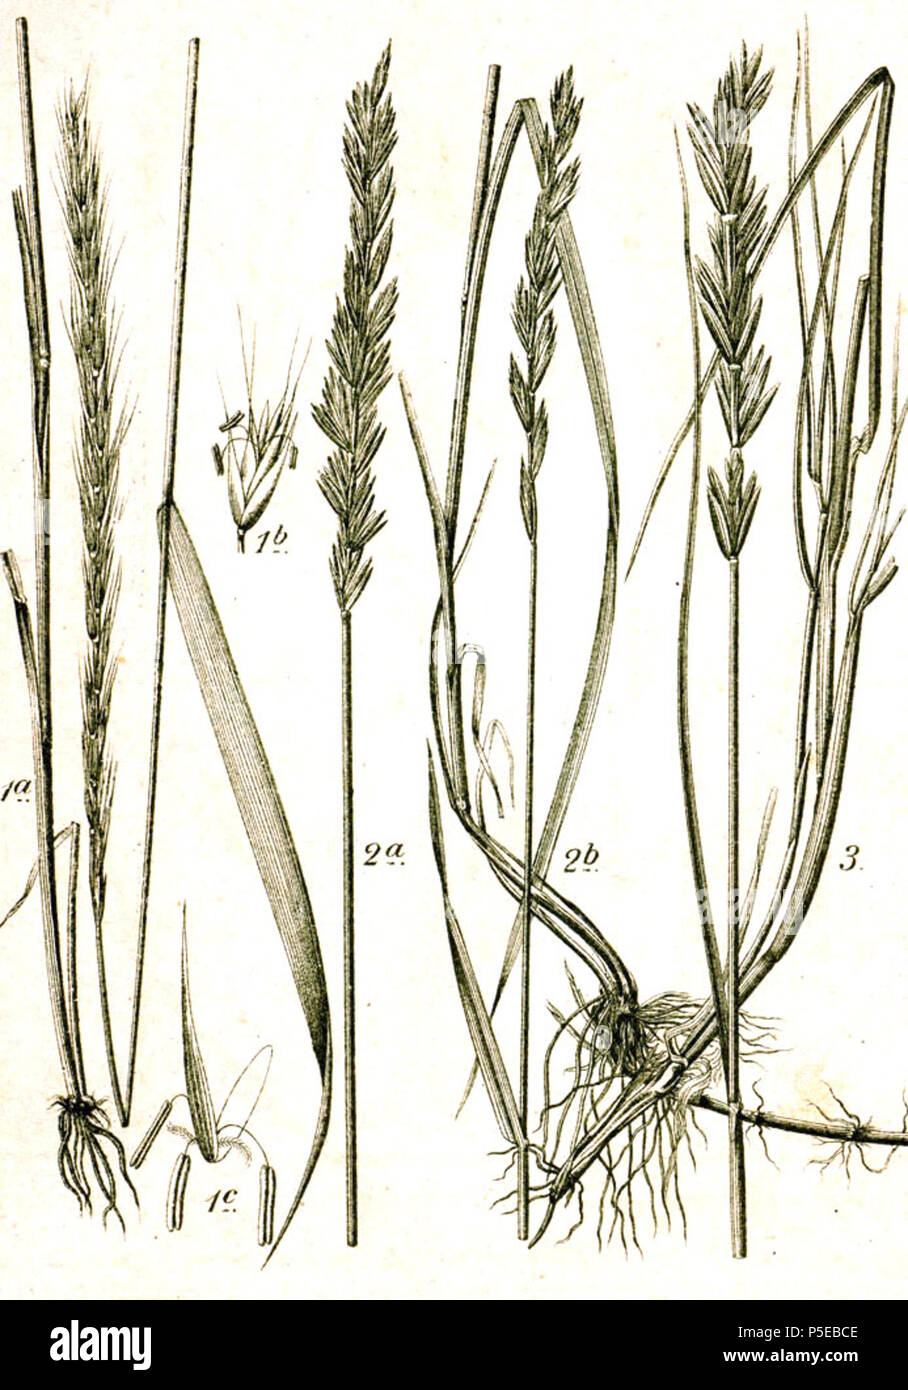 N/A. 1. Elymus caninus (L.) L., syn. Roegneria canina subsp. canina, Agropyron caninum (L.) P.Beauv. 2. Elymus repens (L.) Gould, syn. Elytrigia repens subsp. repens, Agropyron repens (L.) P.Beauv. 3. Elymus farctus (Viv.) Runemark ex Melderis, syn. Thinopyrum junceiforme (Á. Löve & D. Löve) Á. Löve , Elytrigia juncea subsp. juncea, Agropyron junceum (L.) P.Beauv. Original Caption 1. Hunds-Quecke, Agropyron caninum P.B. 2. Kriechende Quecke, A. repens P.B. 3. Binsen-Quecke, A. junceum P.B. . 1796. Johann Georg Sturm, Painted by Jacob Sturm; published by Kurt Stüber 506 Elymus spp Sturm54 Stock Photo